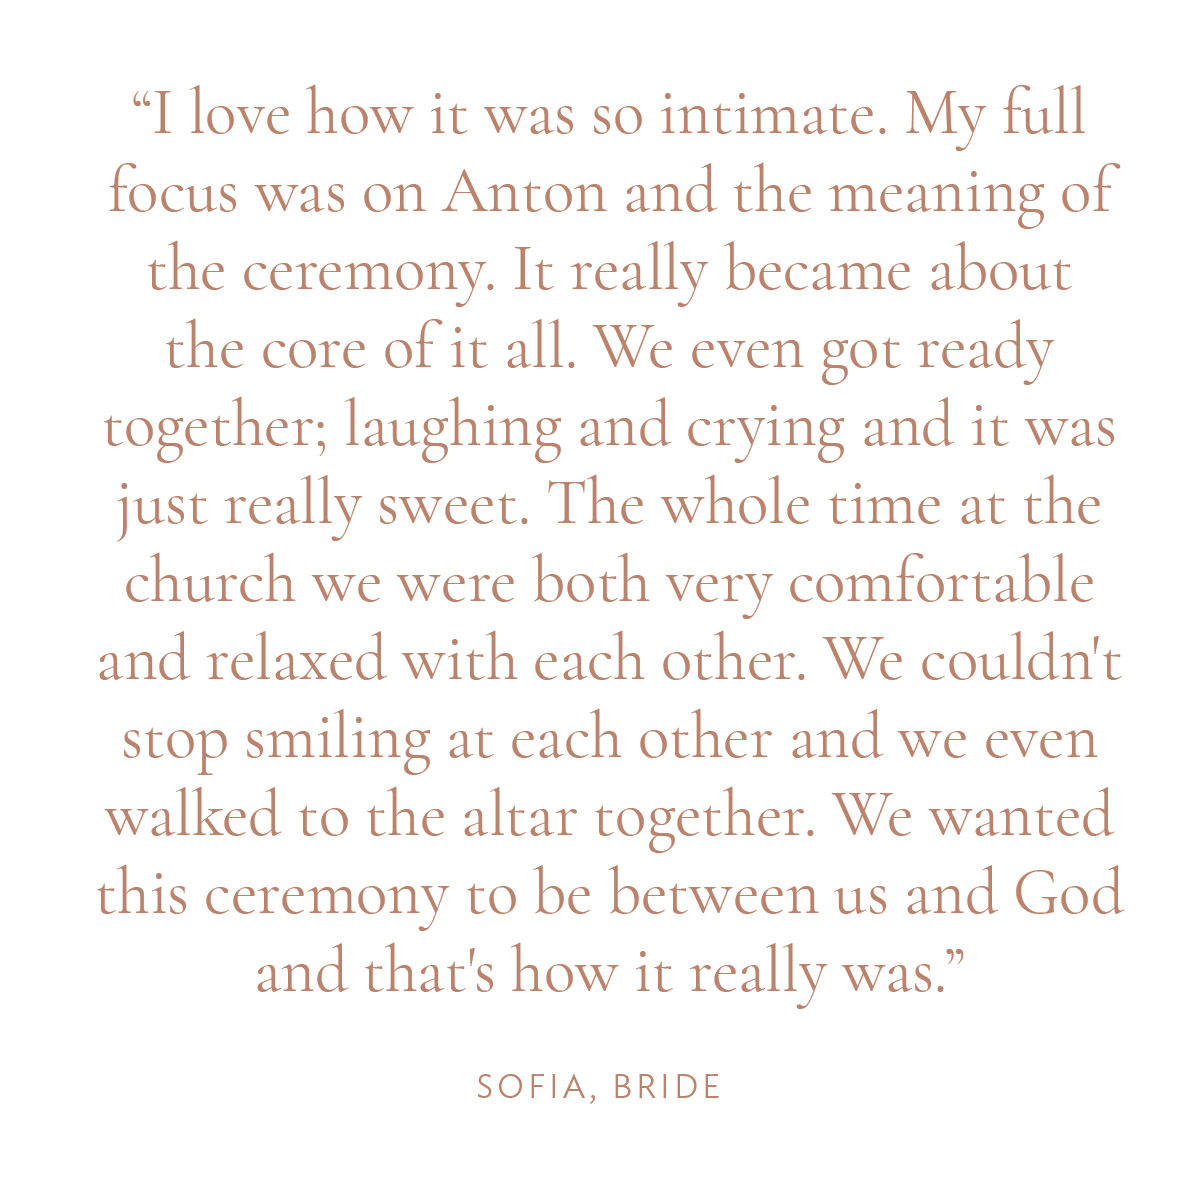 "I love how it was so intimate. My full focus was on Anton and the meaning of the ceremony. It really became about the core of it all. We even got ready together; laughing and crying and it was just really sweet. The whole time at the church we were both very comfortable and relaxed with each other. We couldn't stop smiling at each other and we even walked to the altar together. We wanted this ceremony to be between us and God and that's how it really was." -Sofia, Bride